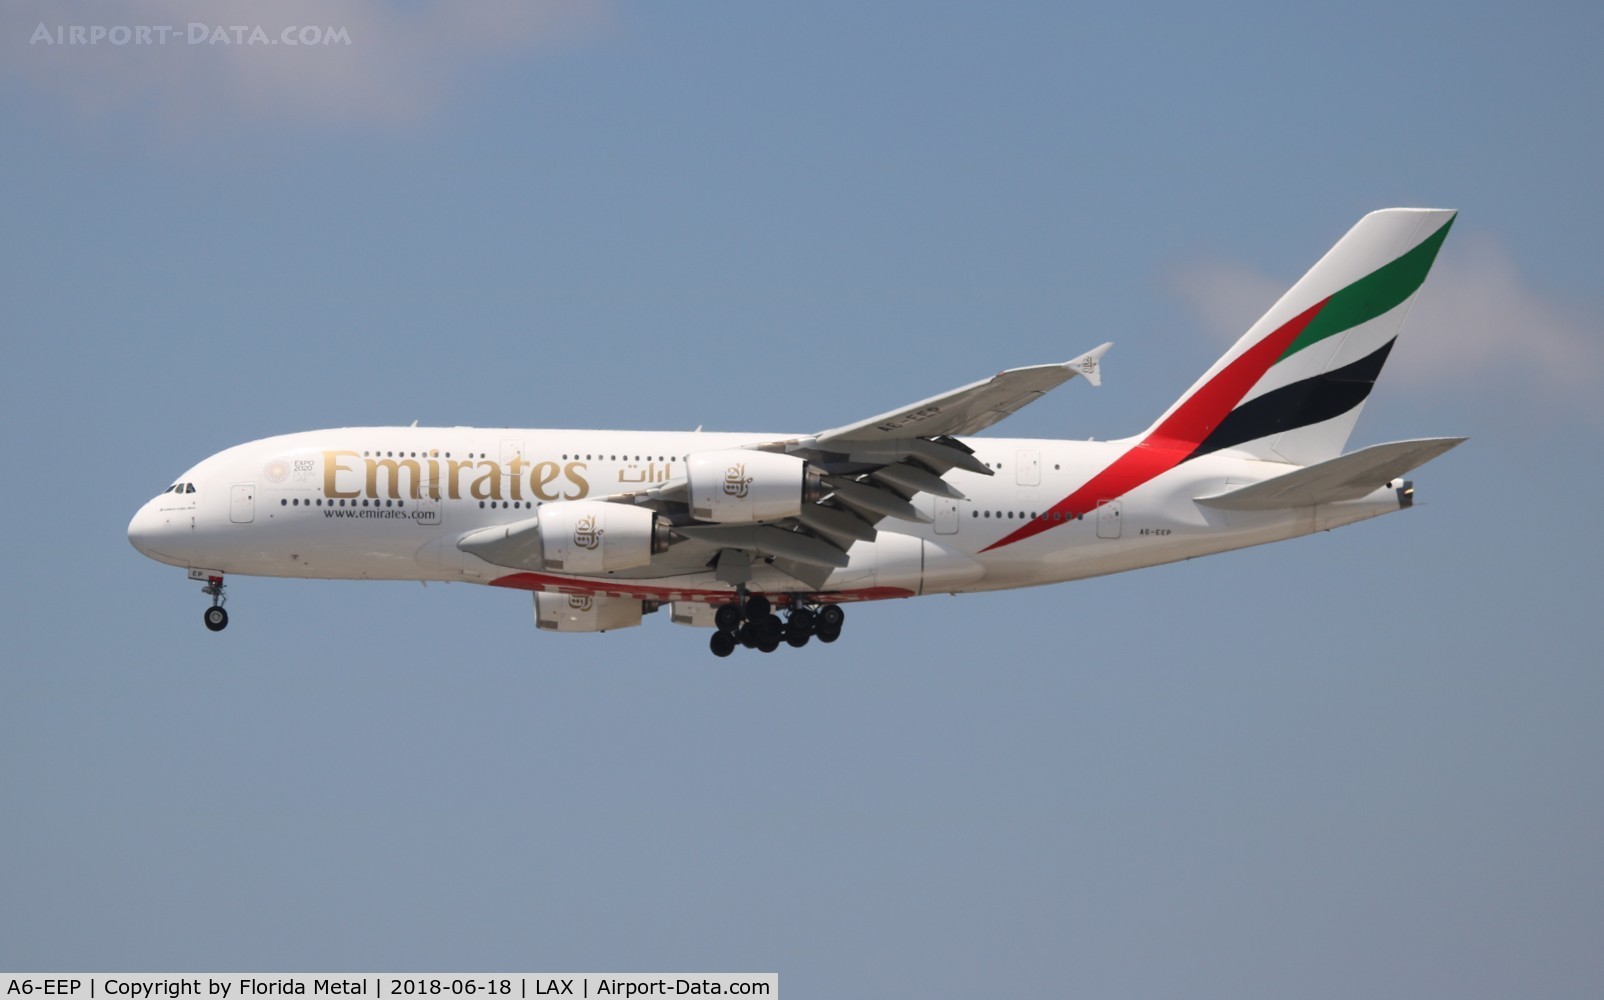 A6-EEP, 2013 Airbus A380-861 C/N 138, Emirates